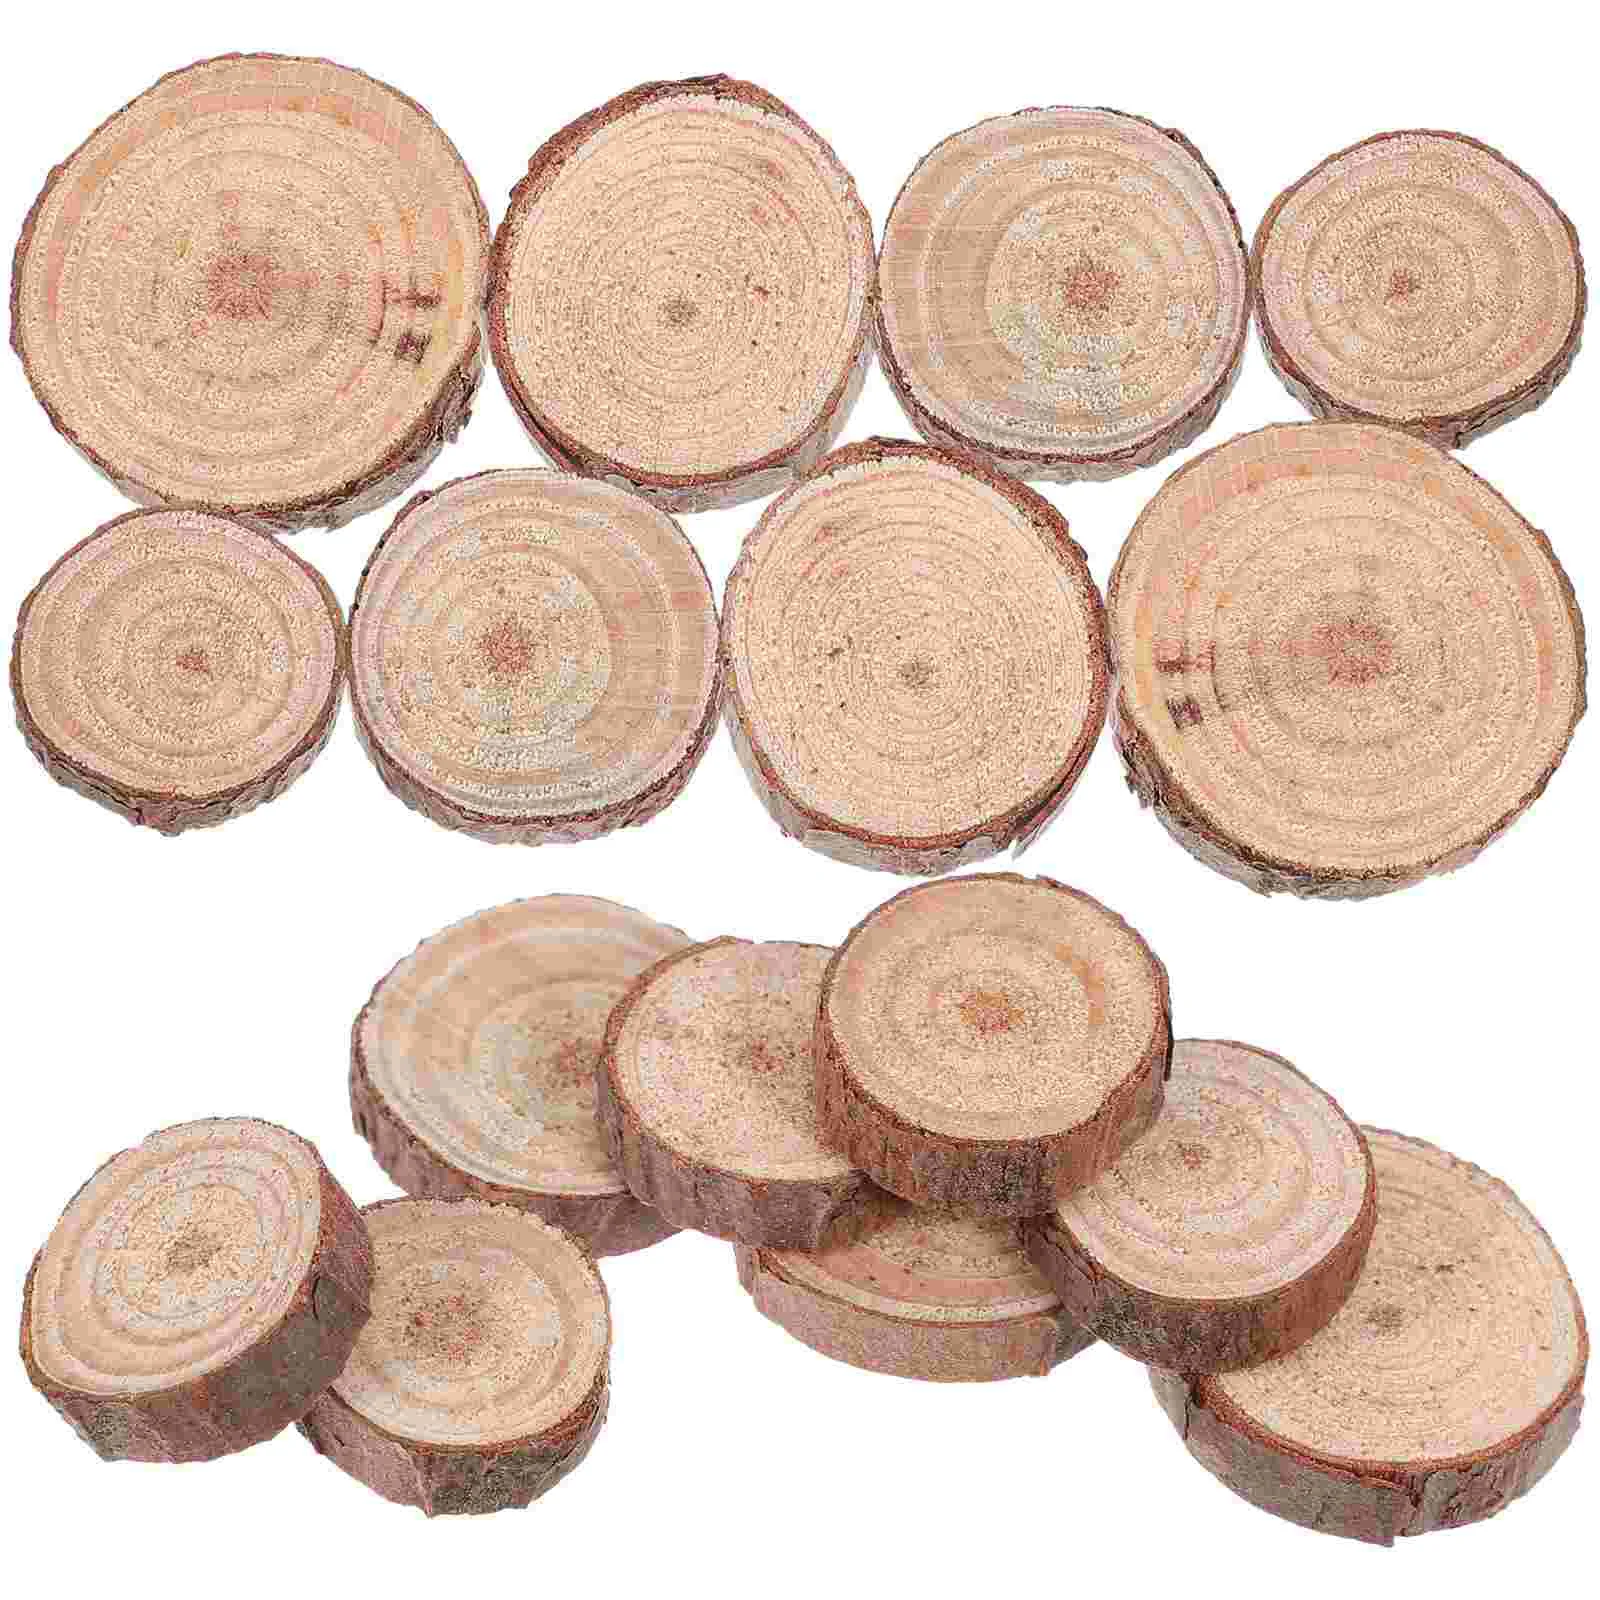 

120 Pcs Round Wood Chips Circles for Crafts Wooden Christmas Ornaments Rounds Slab Unfinished Slices Discs Log